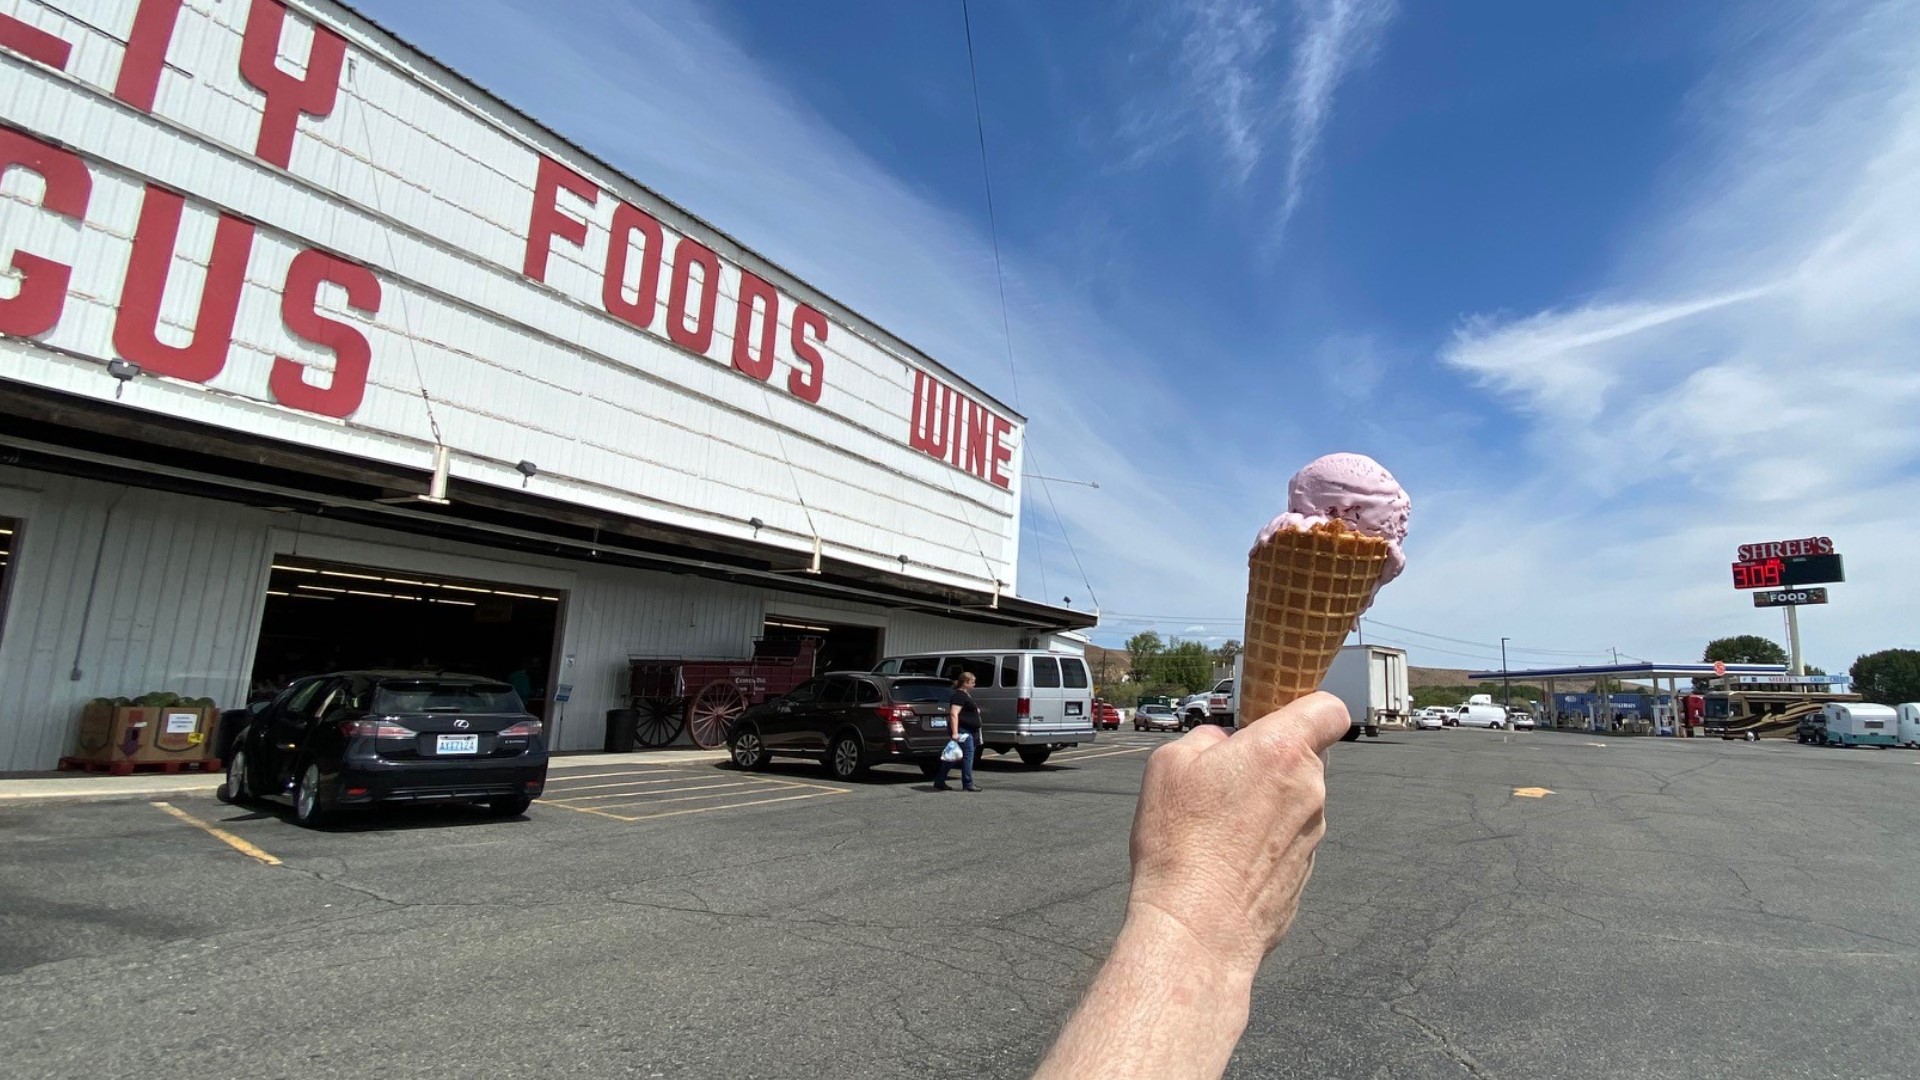 Thorp Fruit & Antique Mall is one of Washington's most popular pit stops - Fuel Up